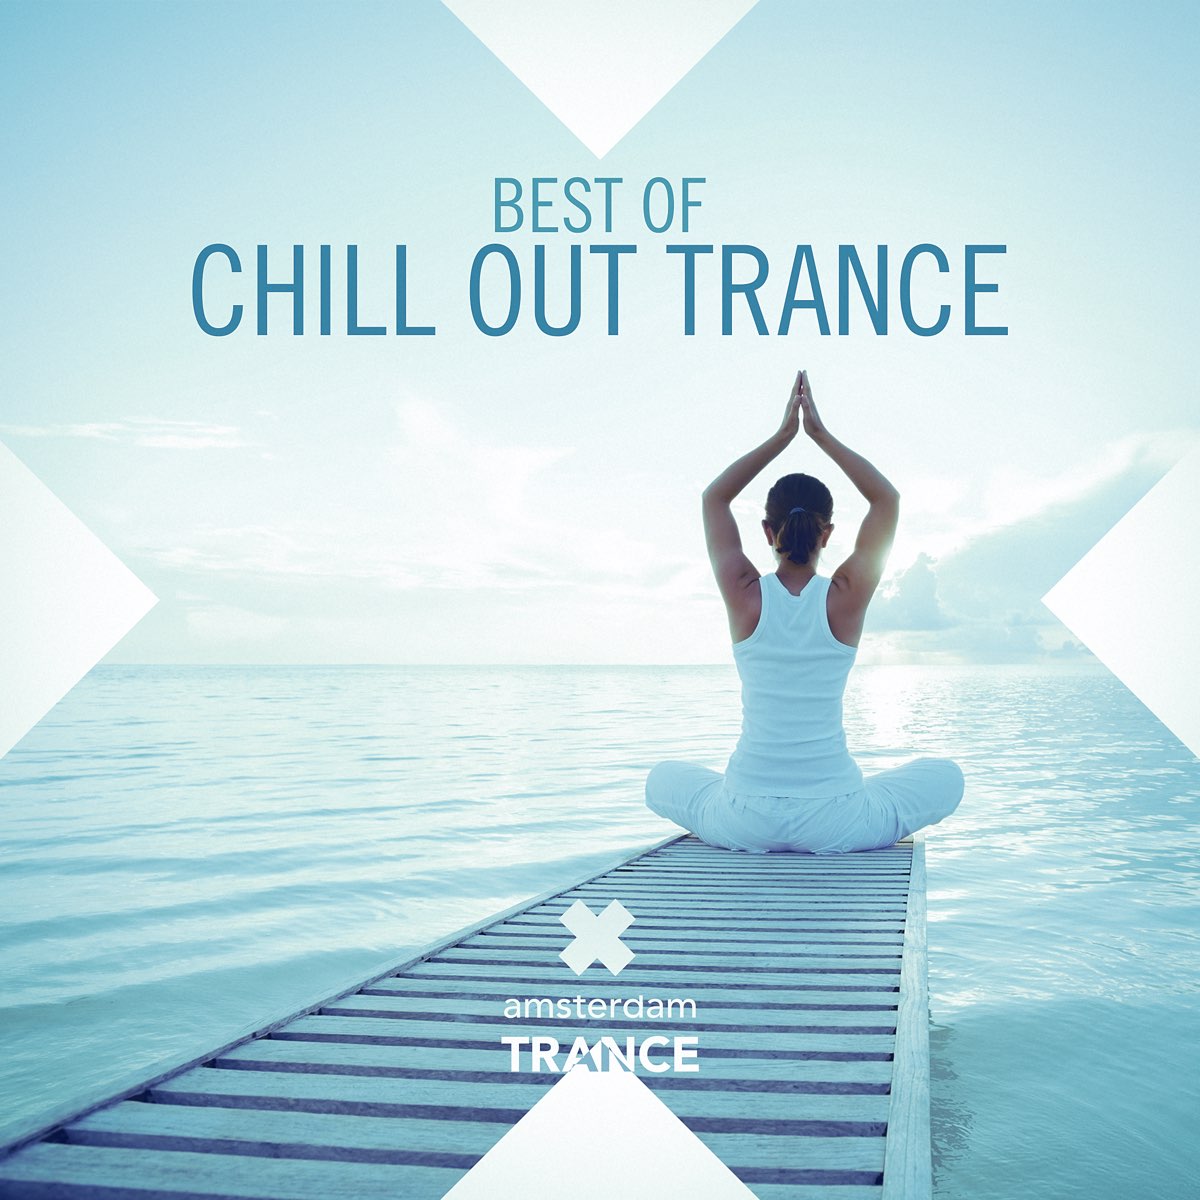 Chillout Trance. Vocal Trance Chillout. Chill надпись. Chillout картинки. Stand chillout